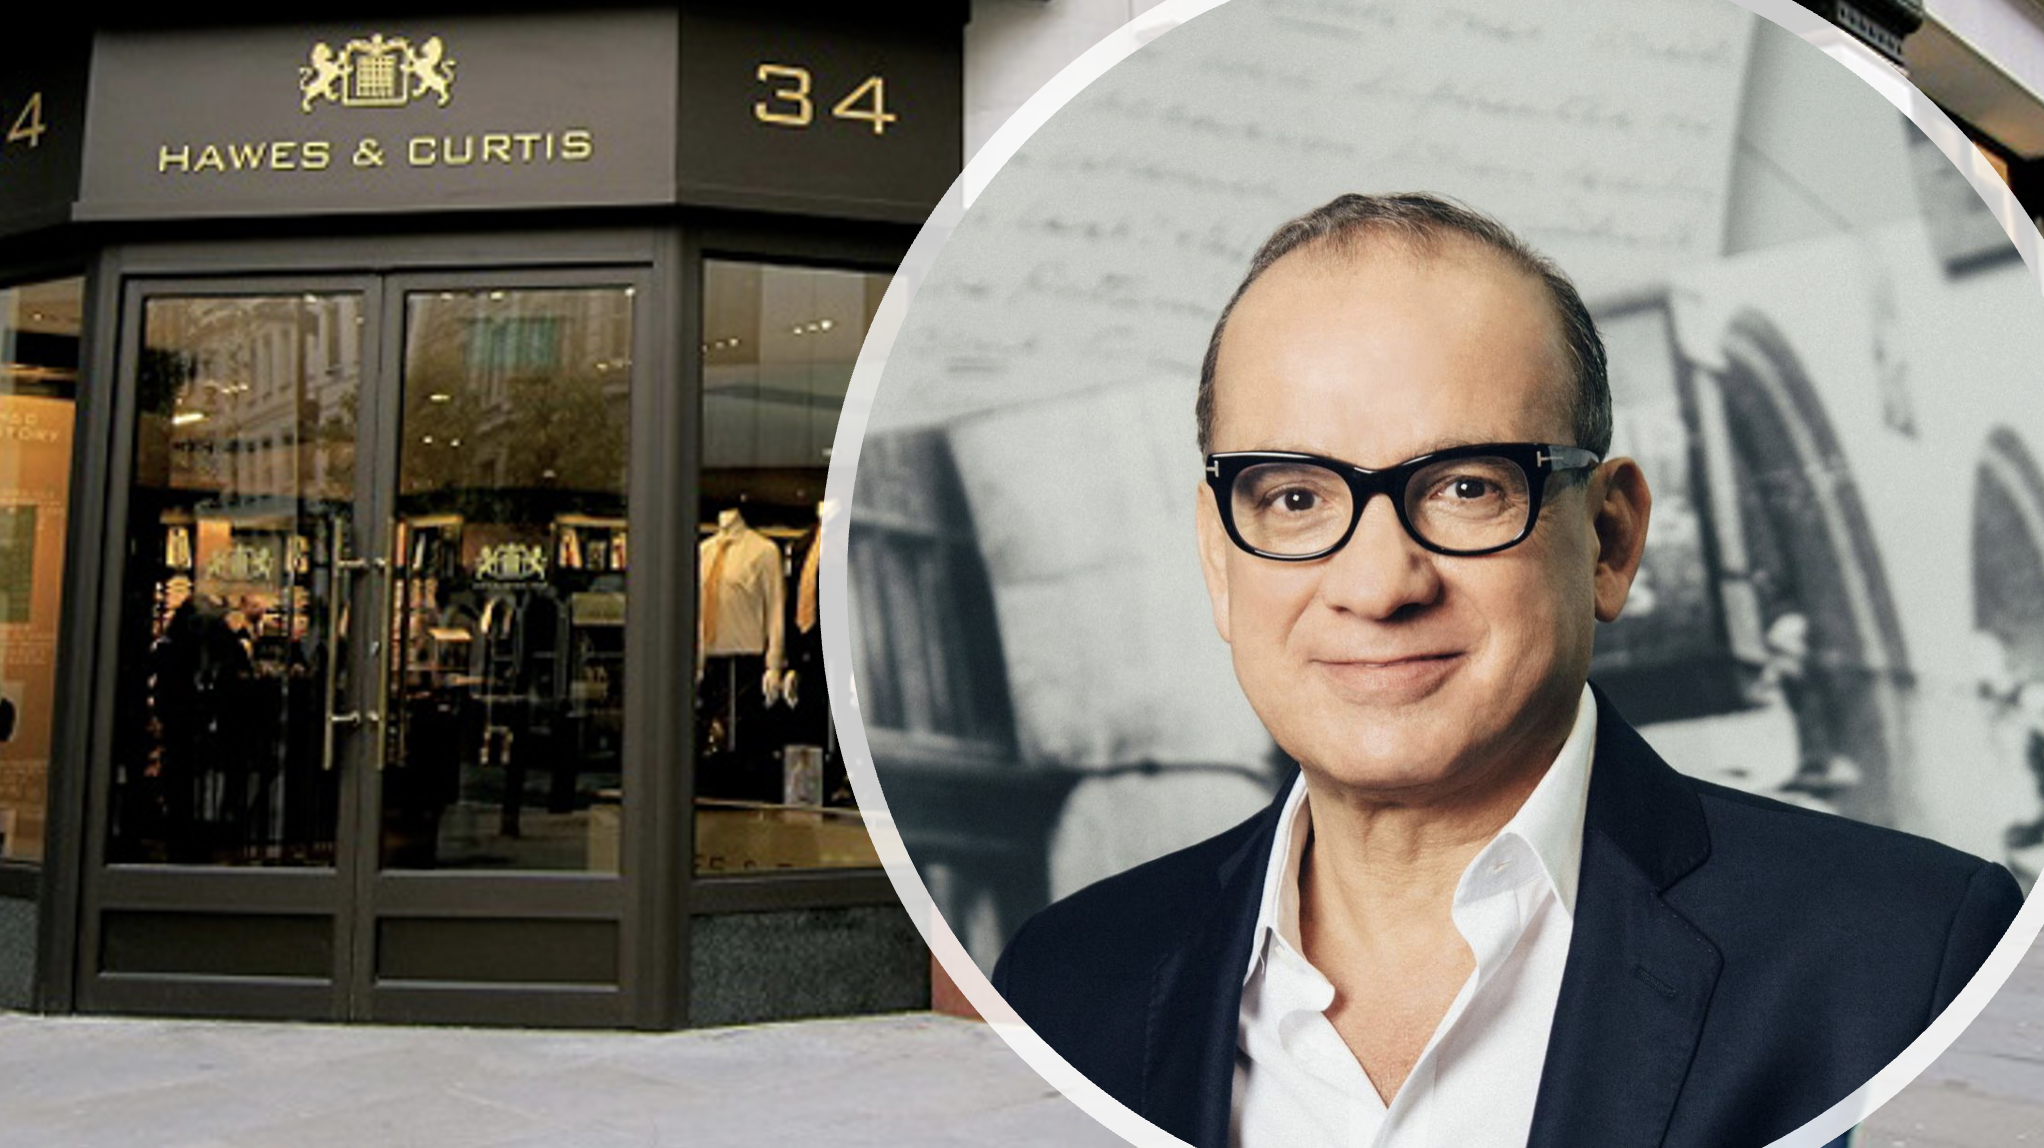 Hawes & Curtis owner Touker Suleyman says stores in shopping centres are  more profitable than high streets – T-VINE